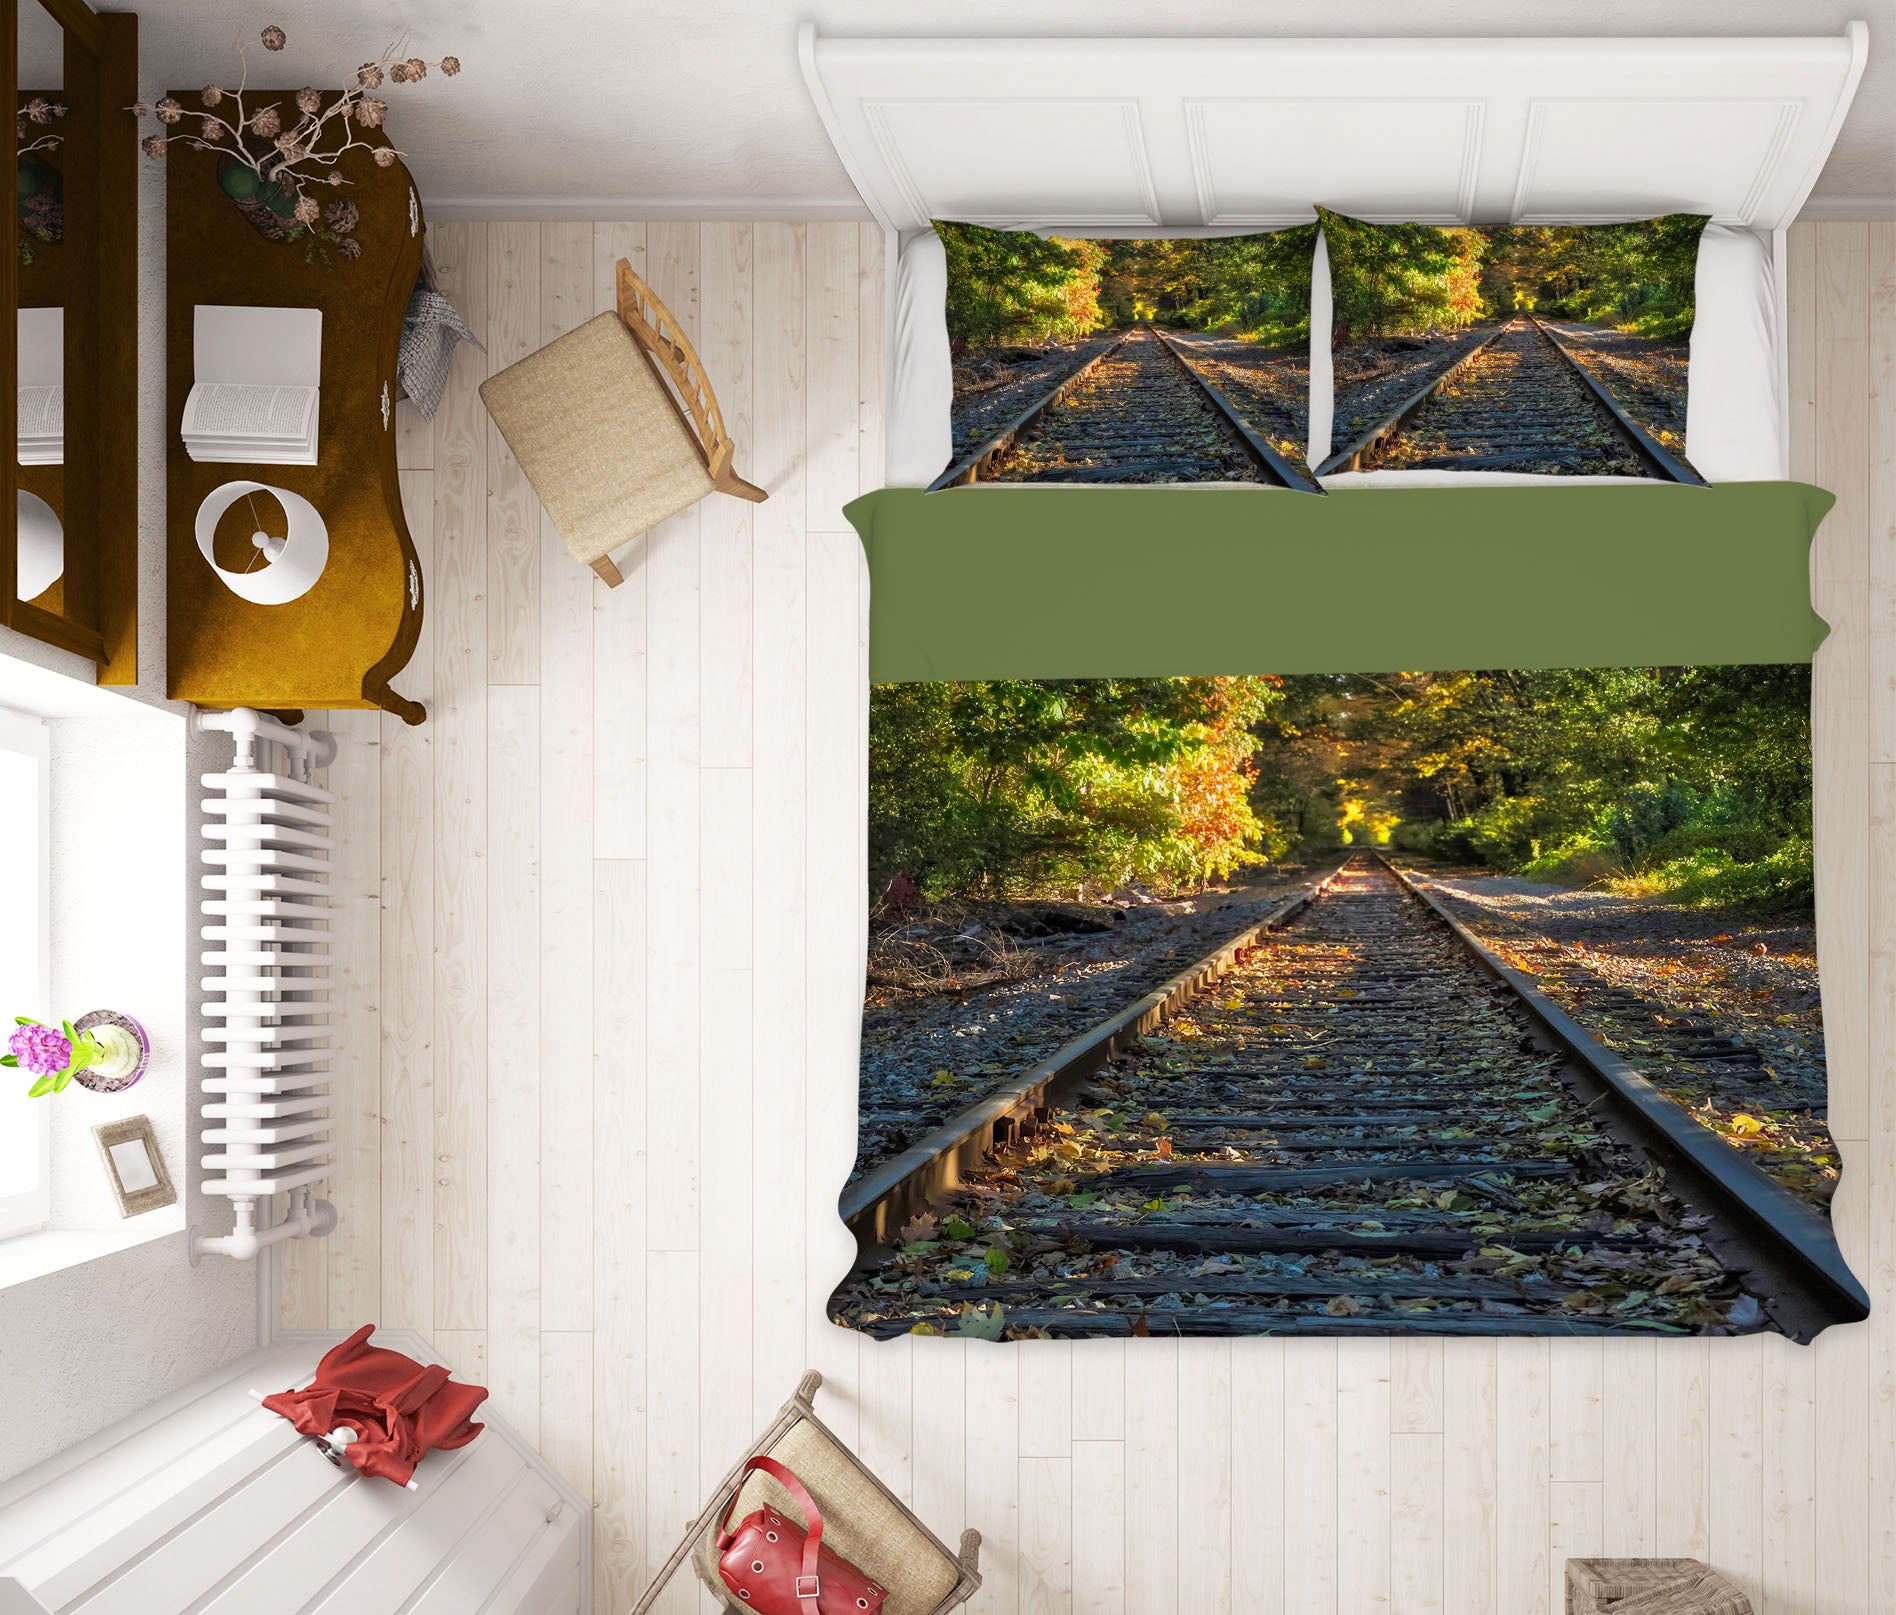 3D Railway Forest 1030 Jerry LoFaro bedding Bed Pillowcases Quilt